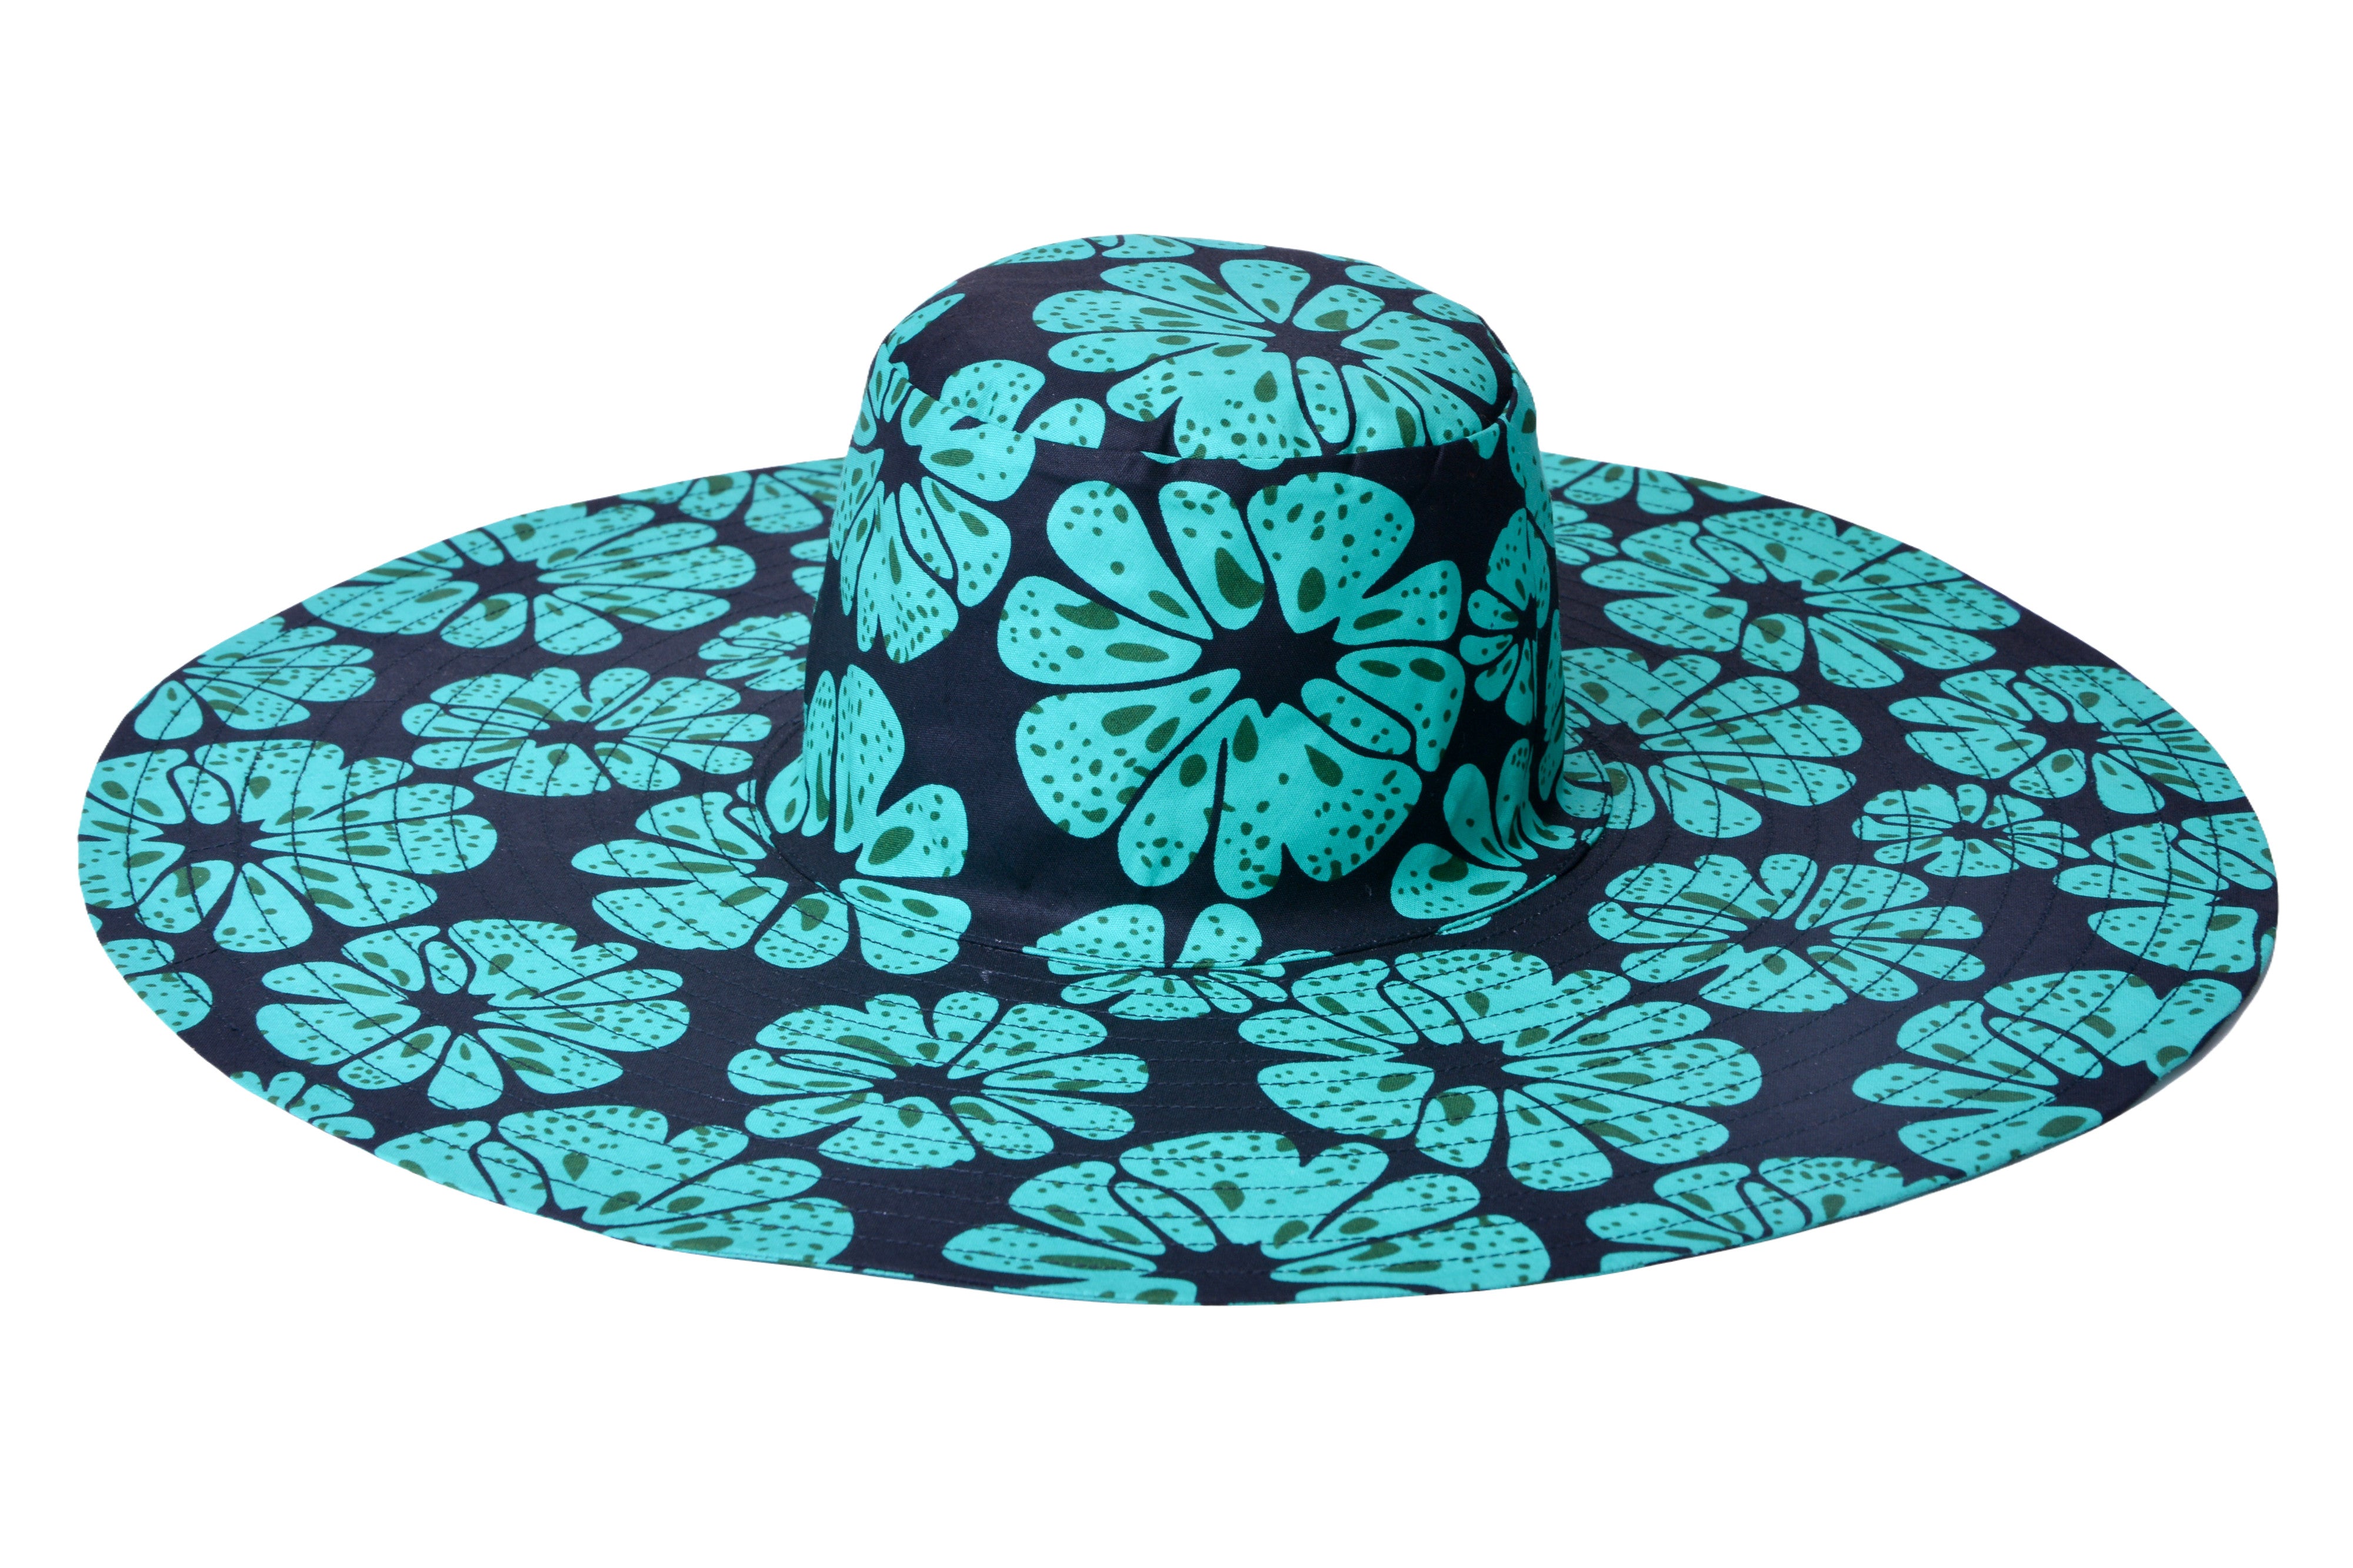 Jollo Alizeti Modern African Hat: let comfort and style give you the best shade